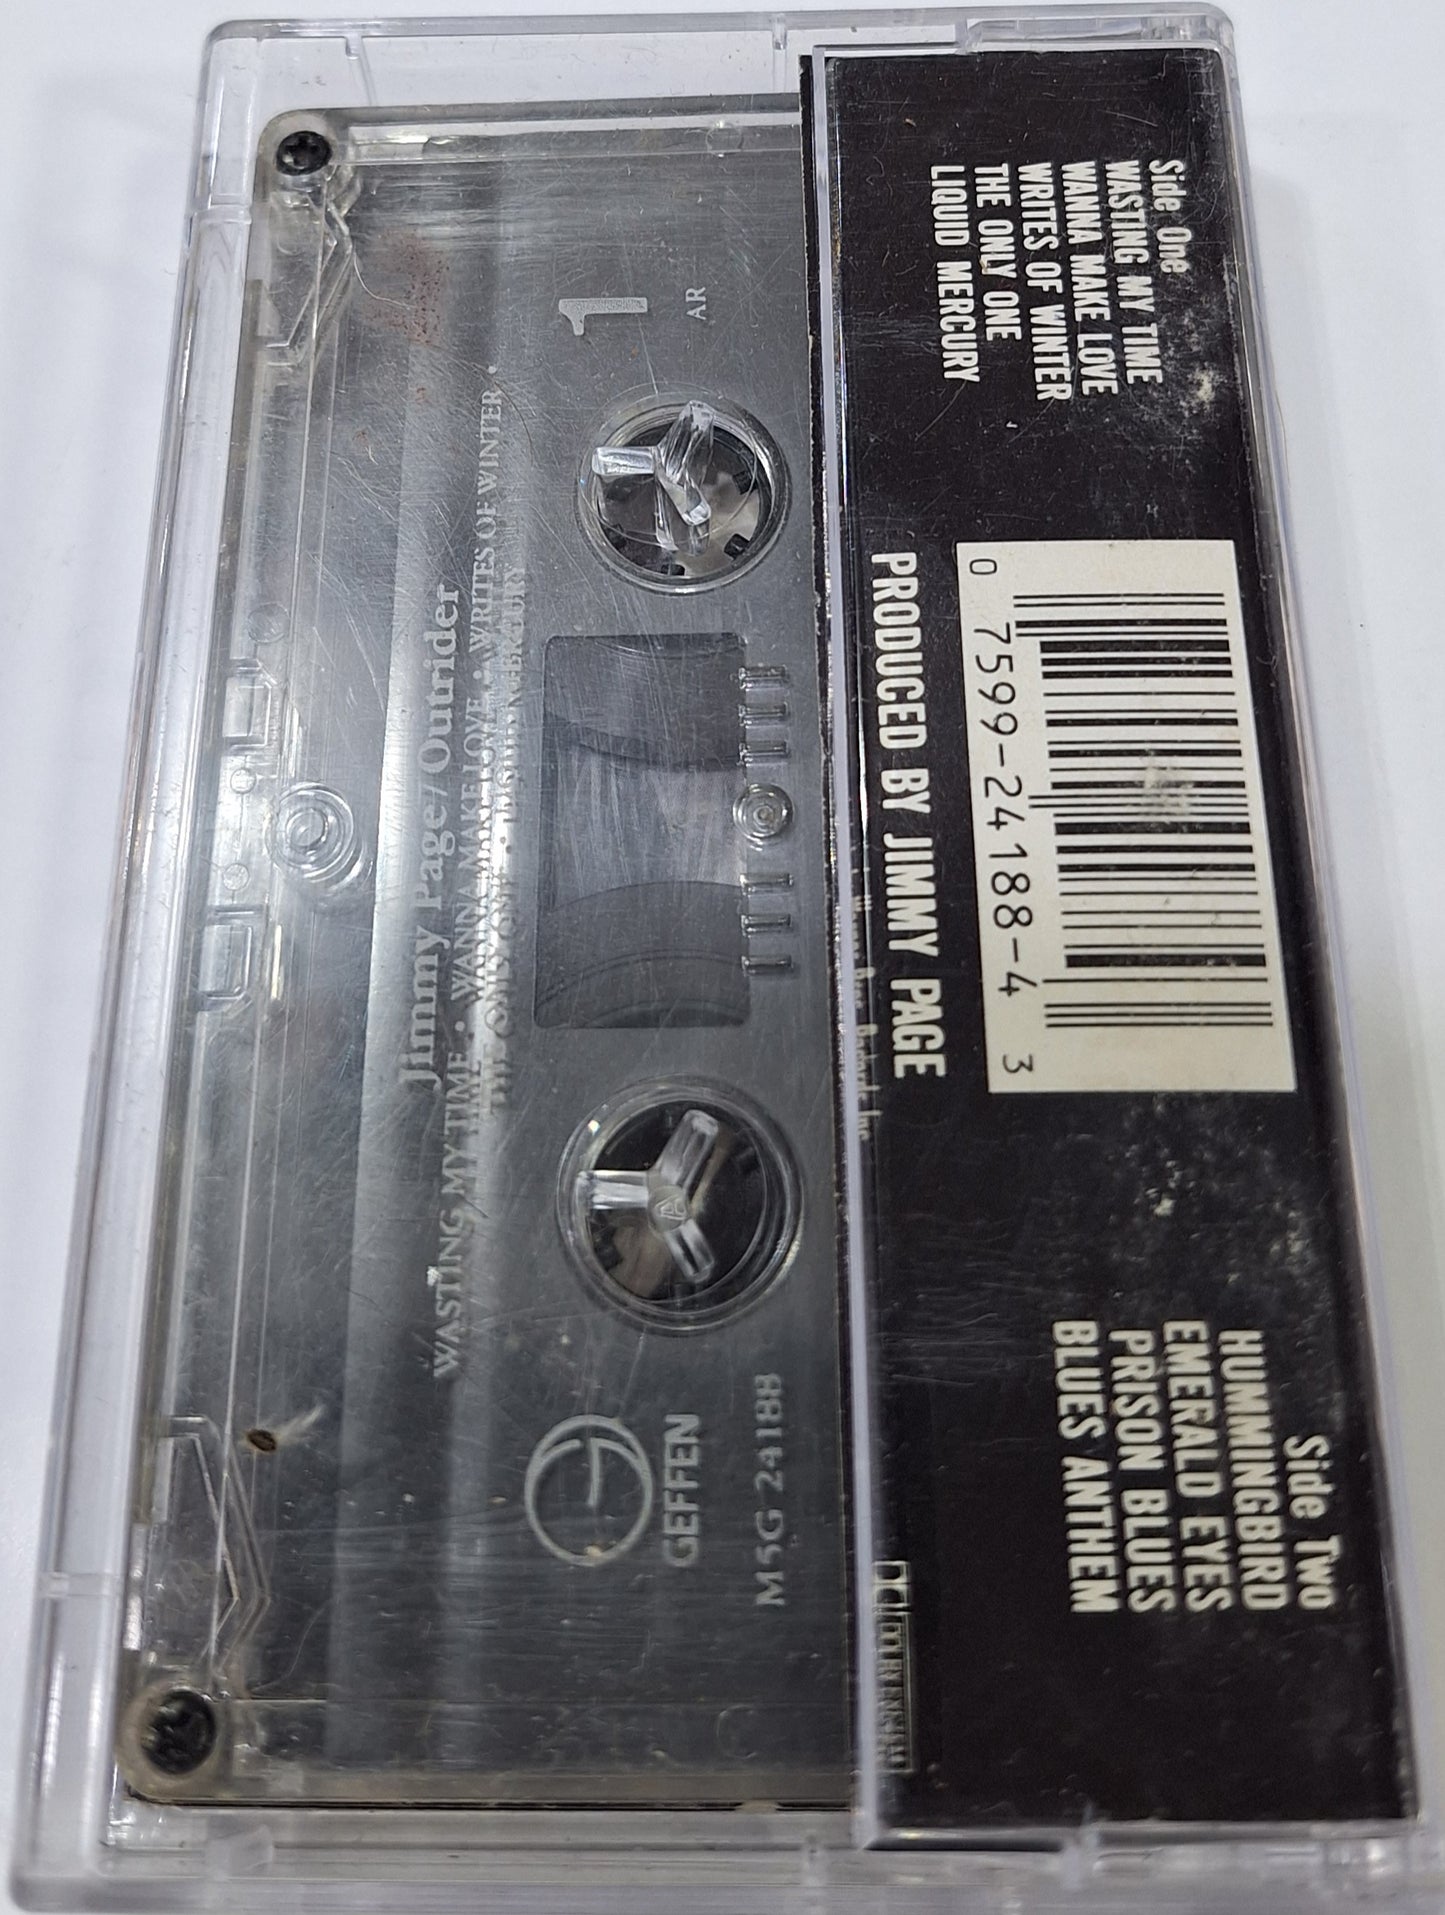 JIMMY PAGE - OUTRIDER  CASSETTE